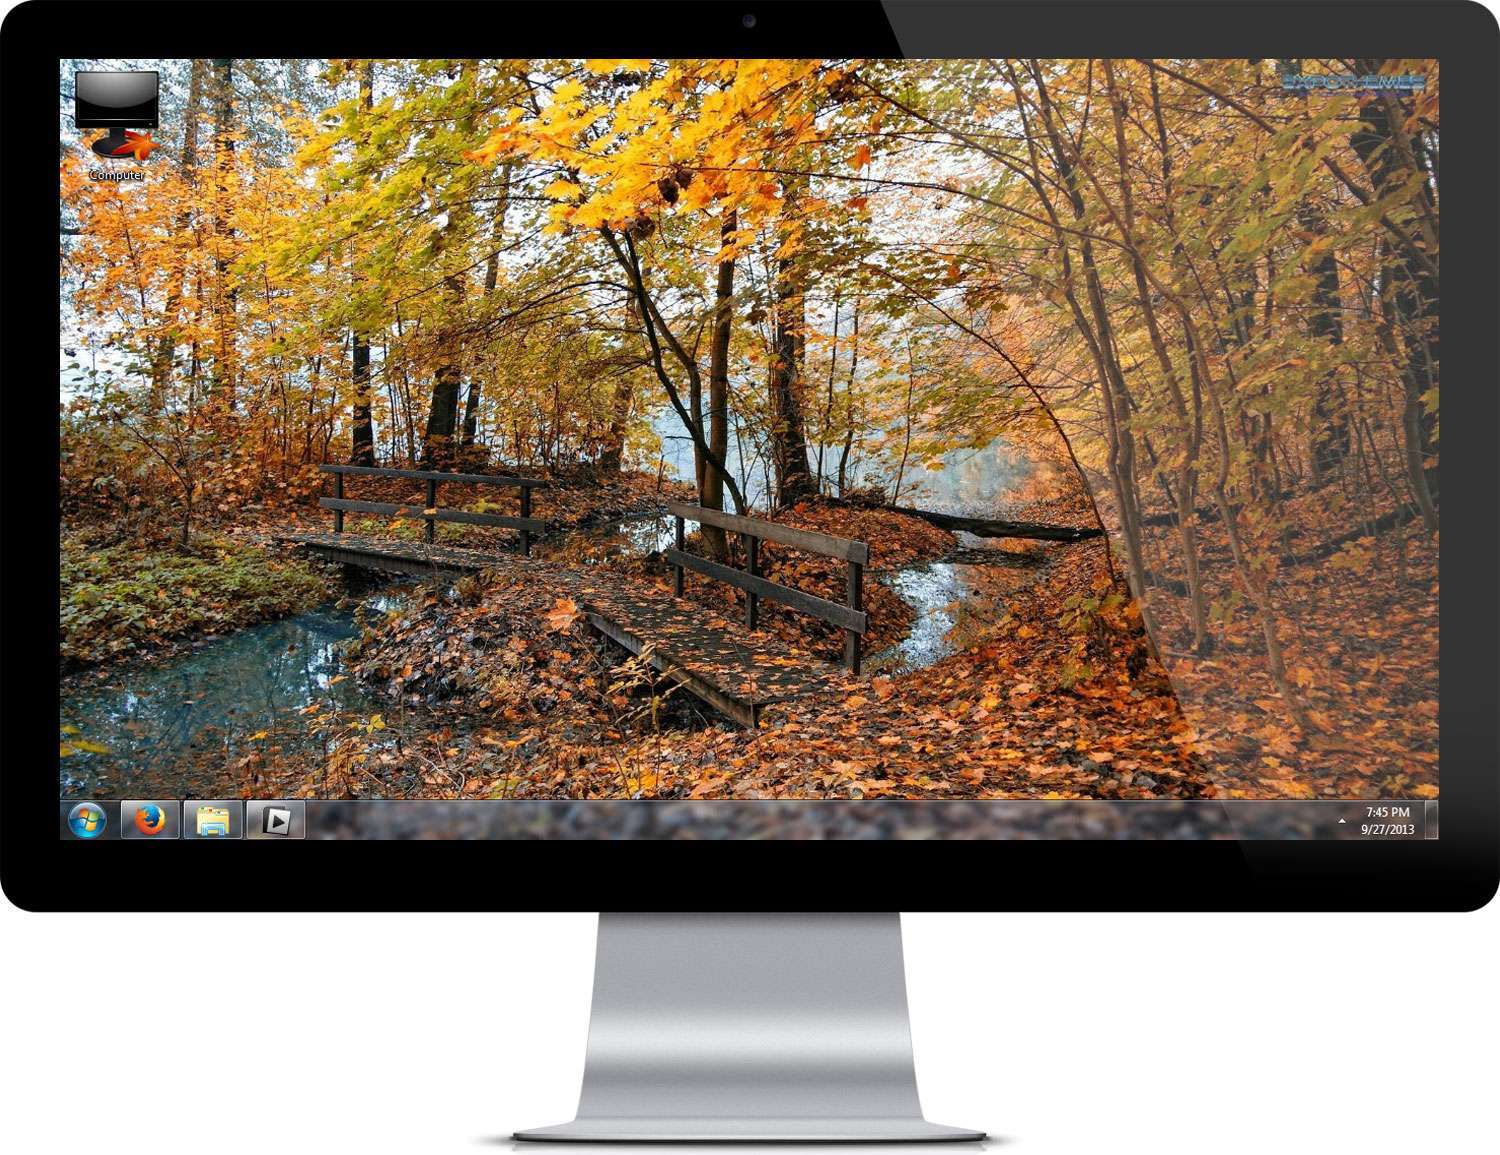 Autumn Wallpaper Theme For Windows And